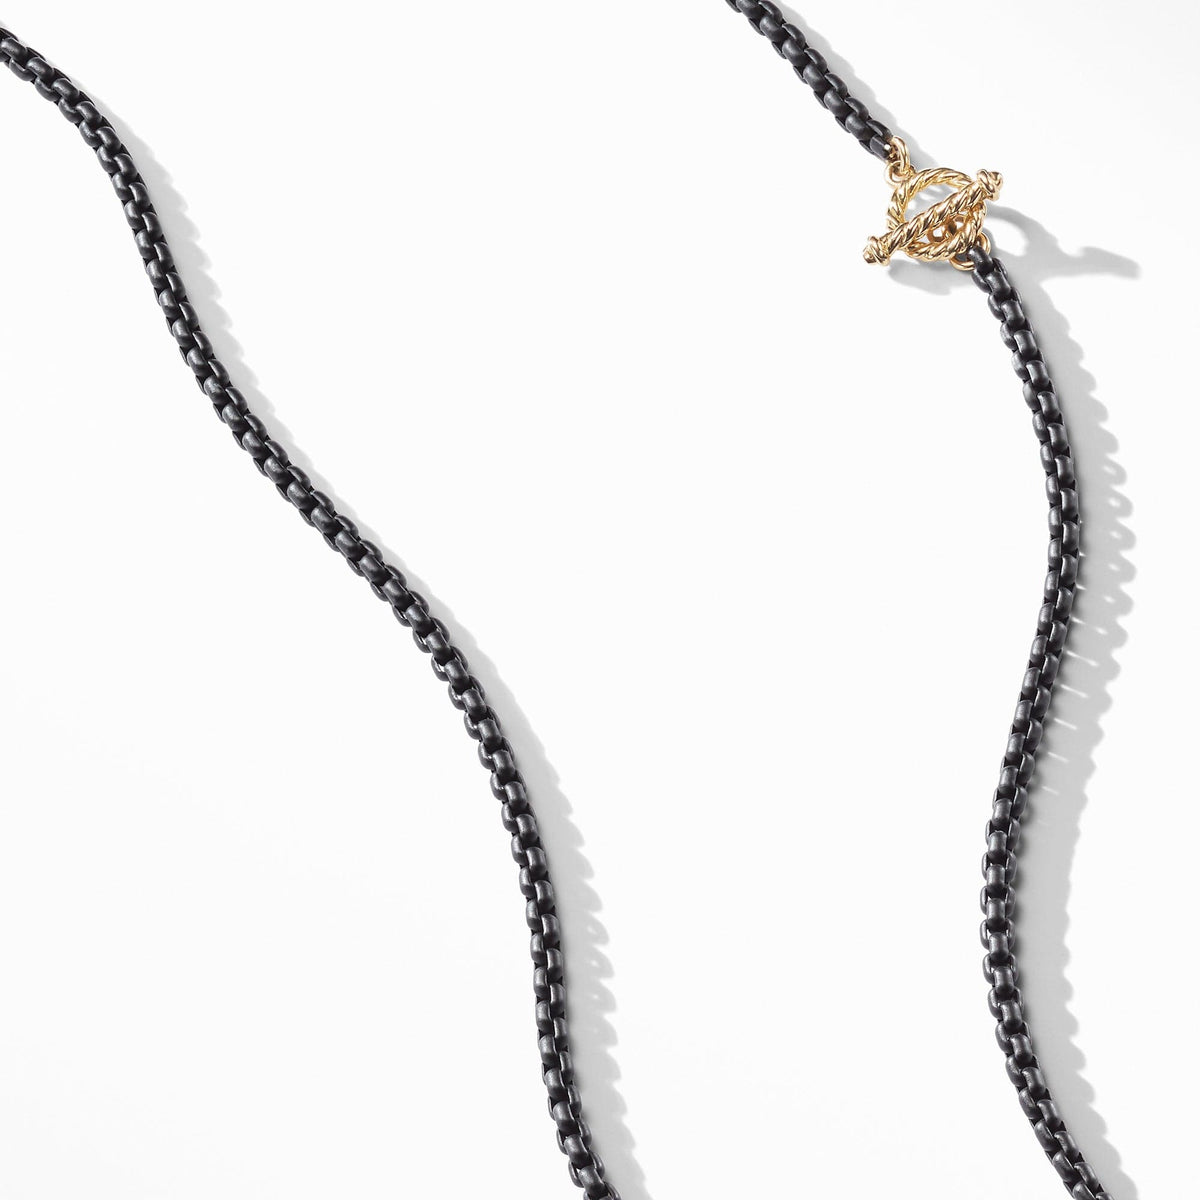 DY Bel Aire Chain Necklace in Black with 14K Gold Accents